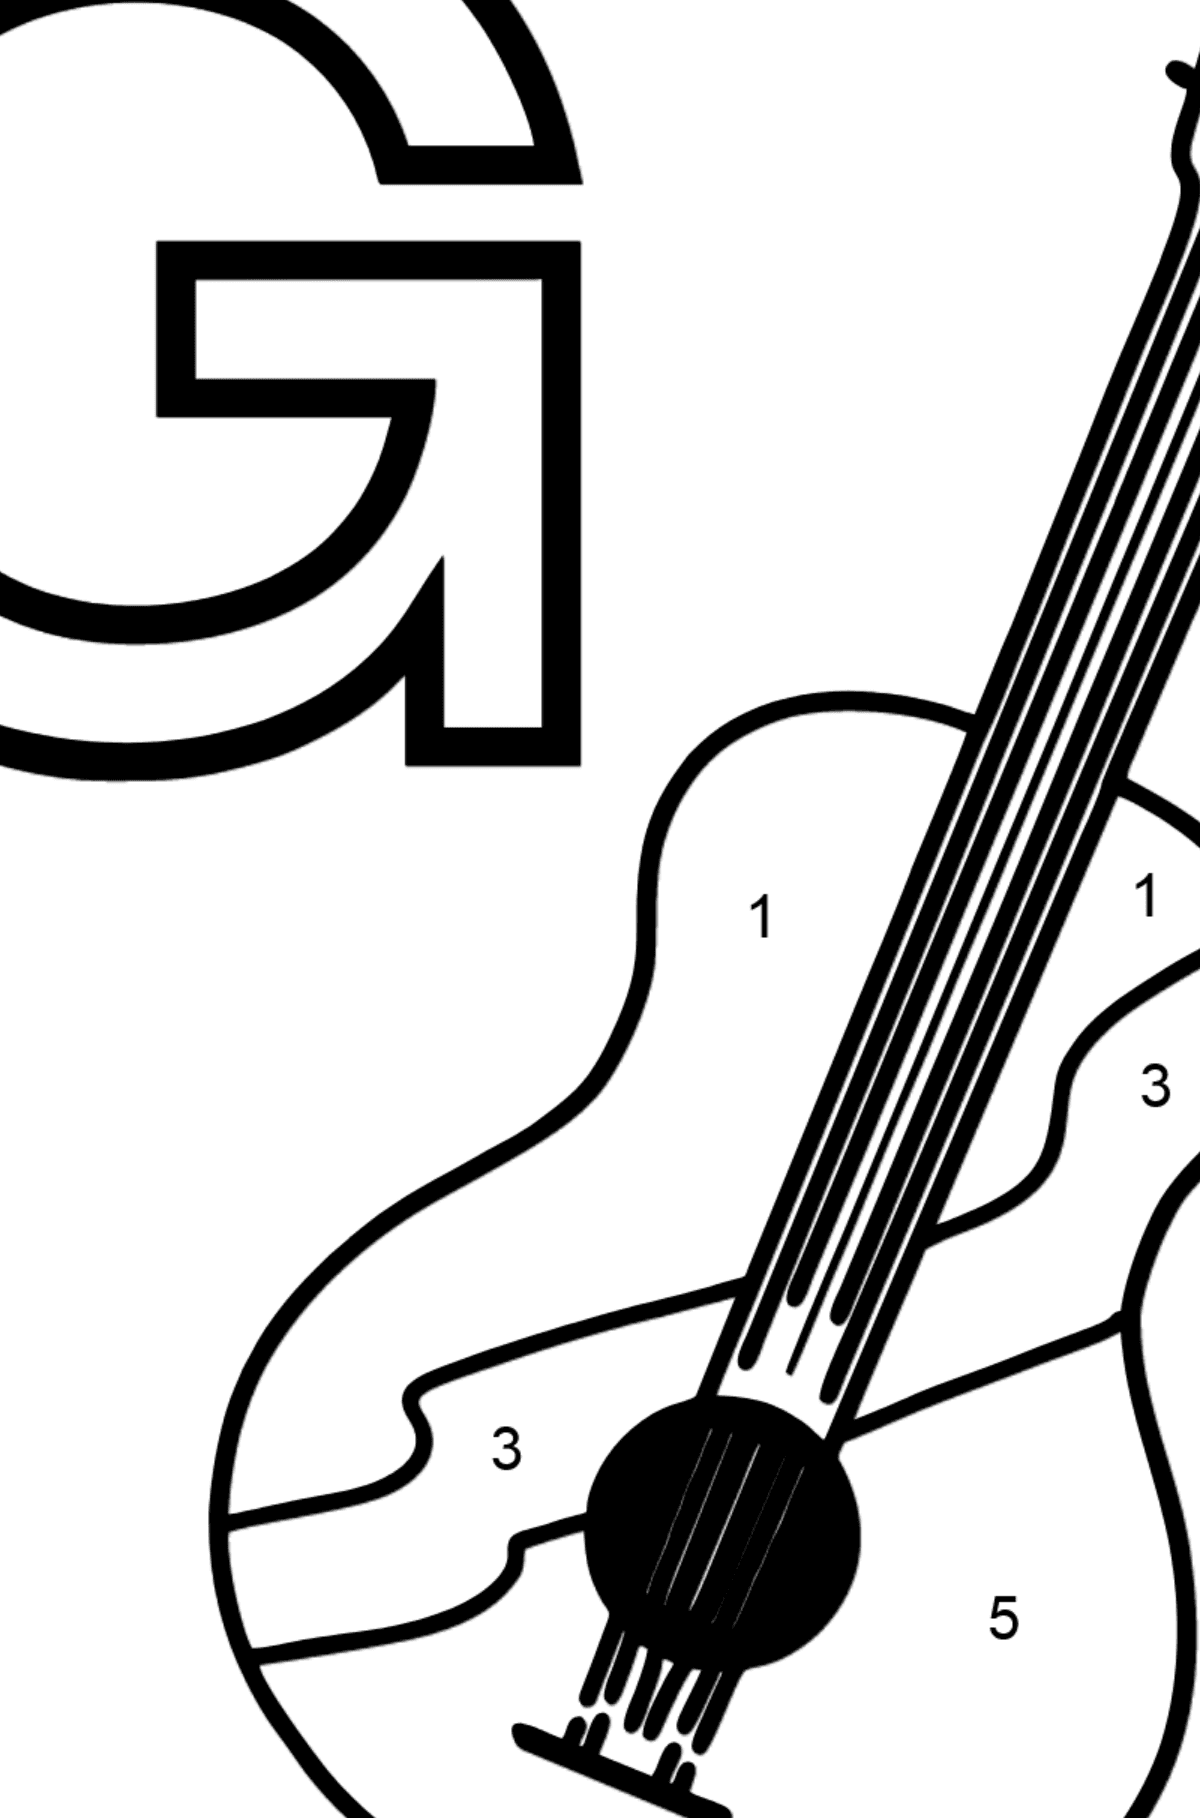 Spanish Letter G coloring pages - GUITARRA - Coloring by Numbers for Kids